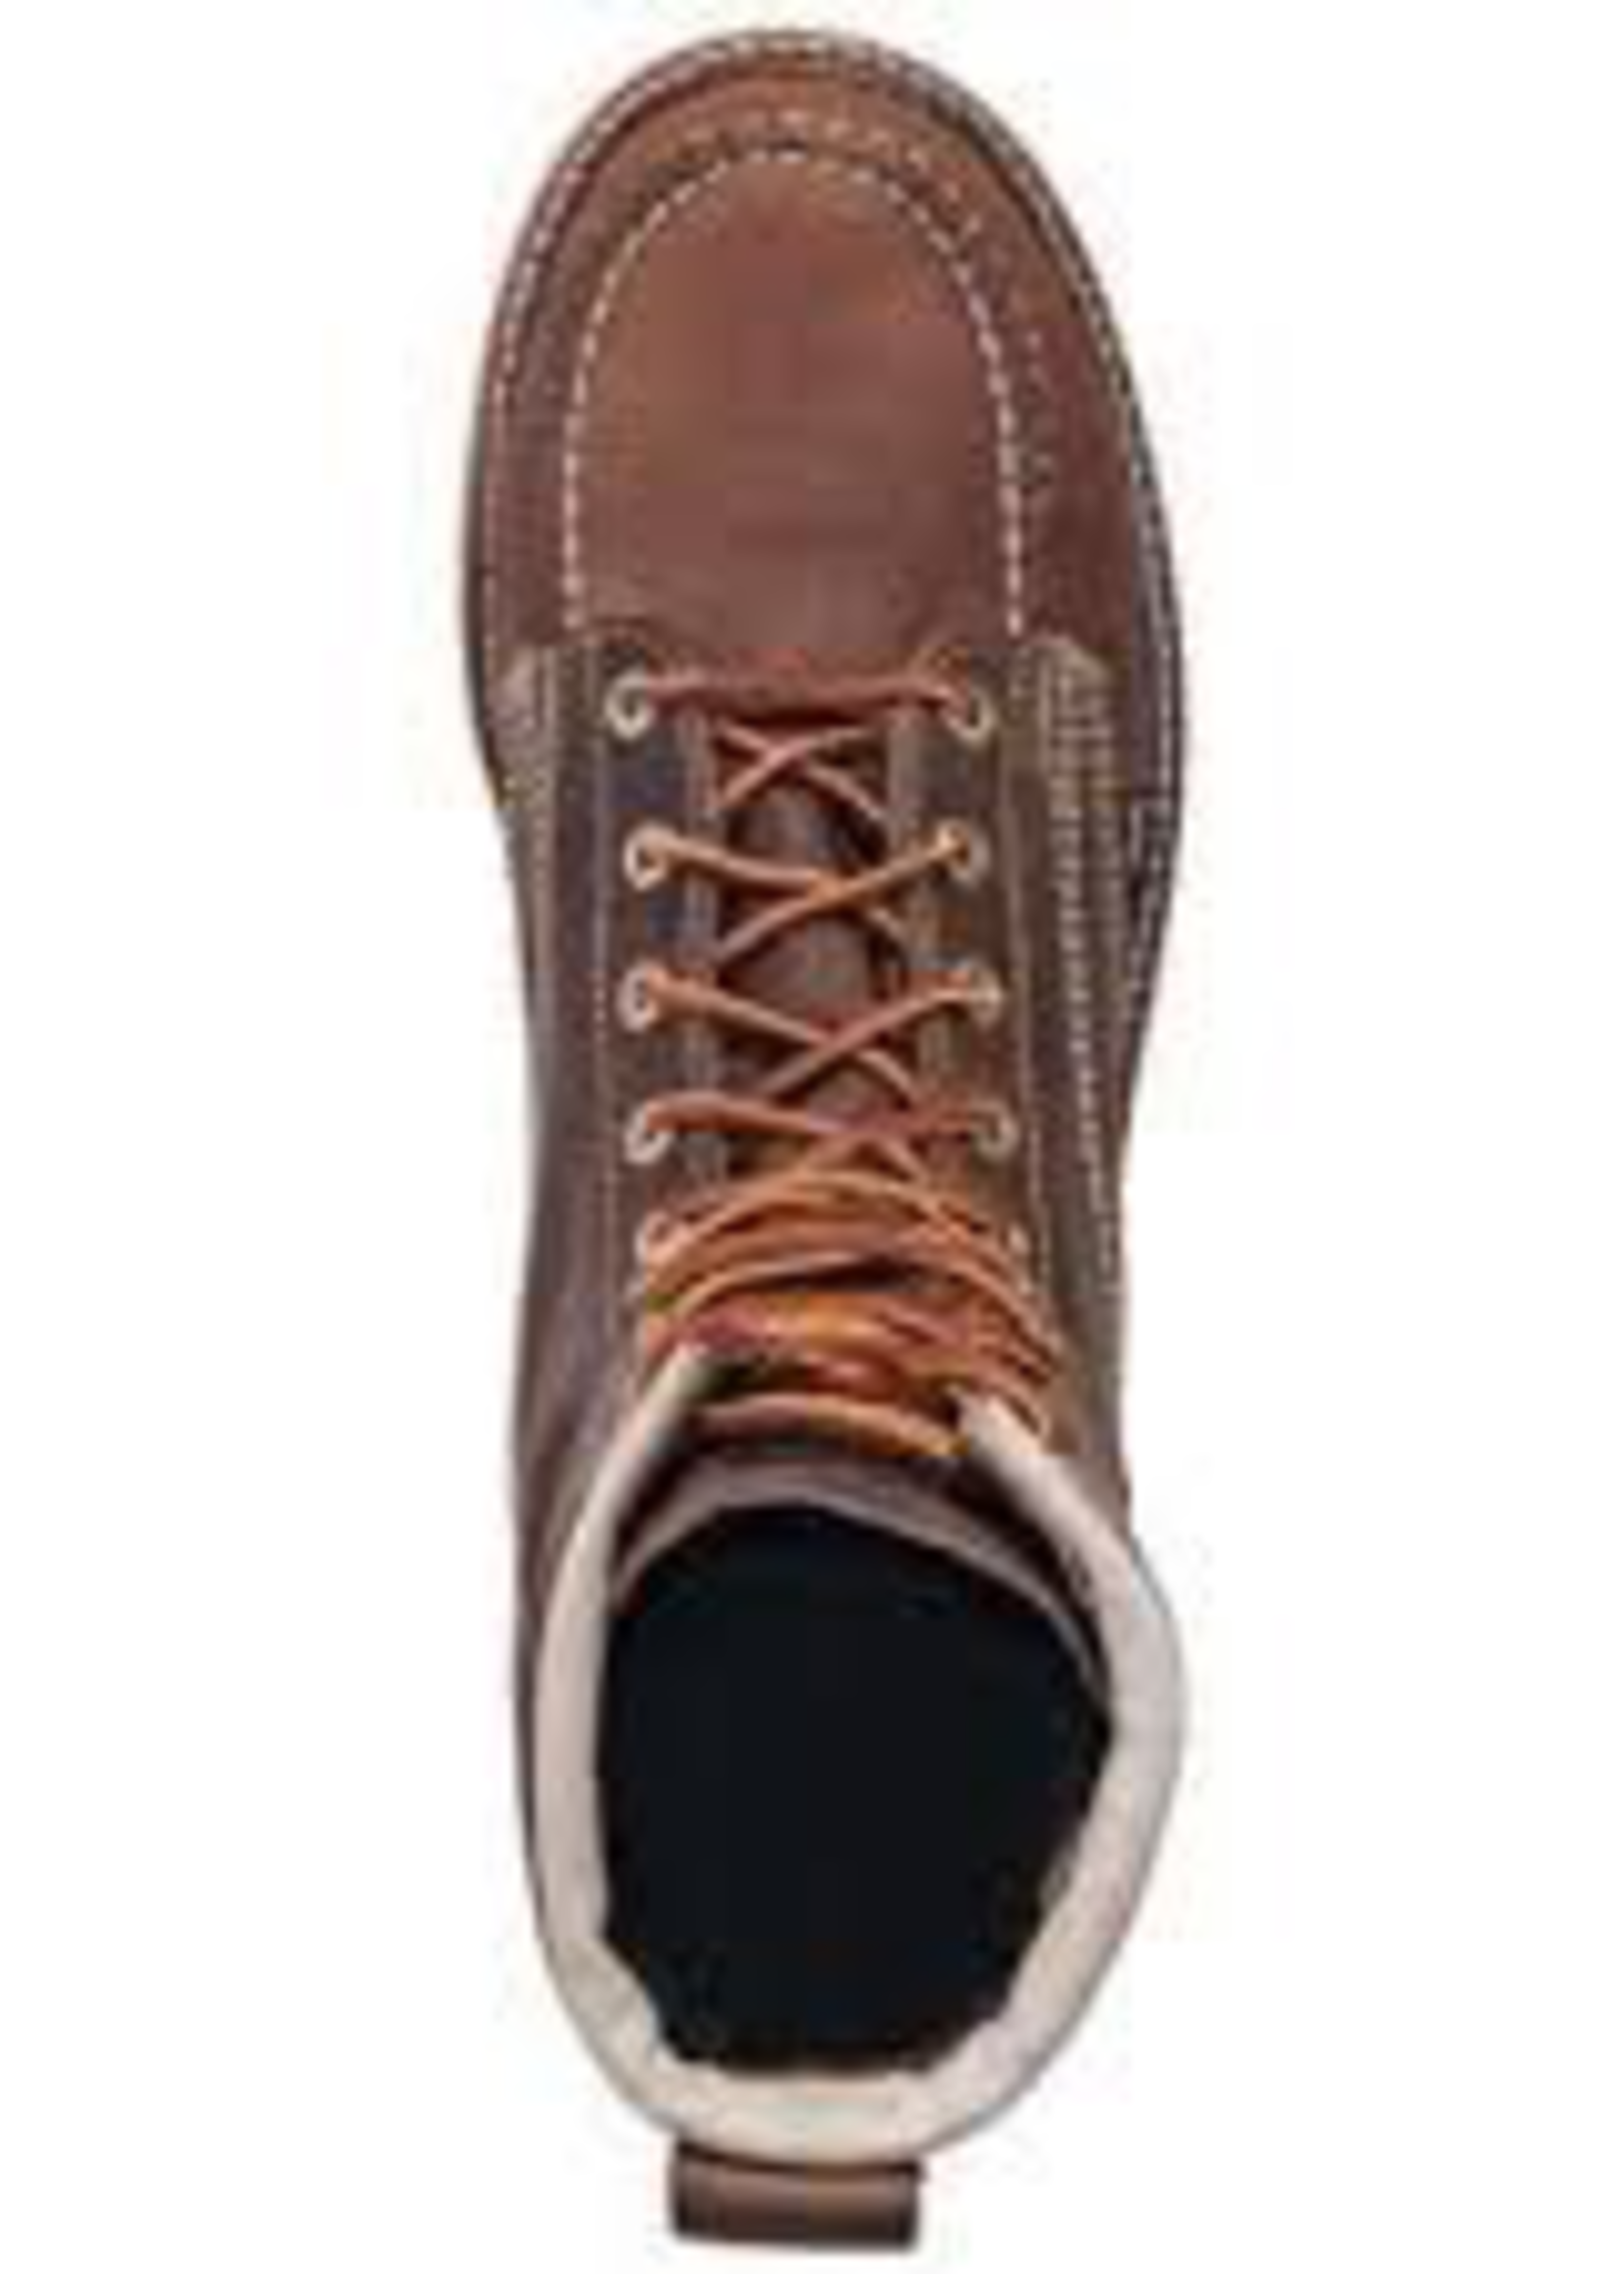 Boots-Men THOROGOOD 804-4478 8in Safety Moc Toe